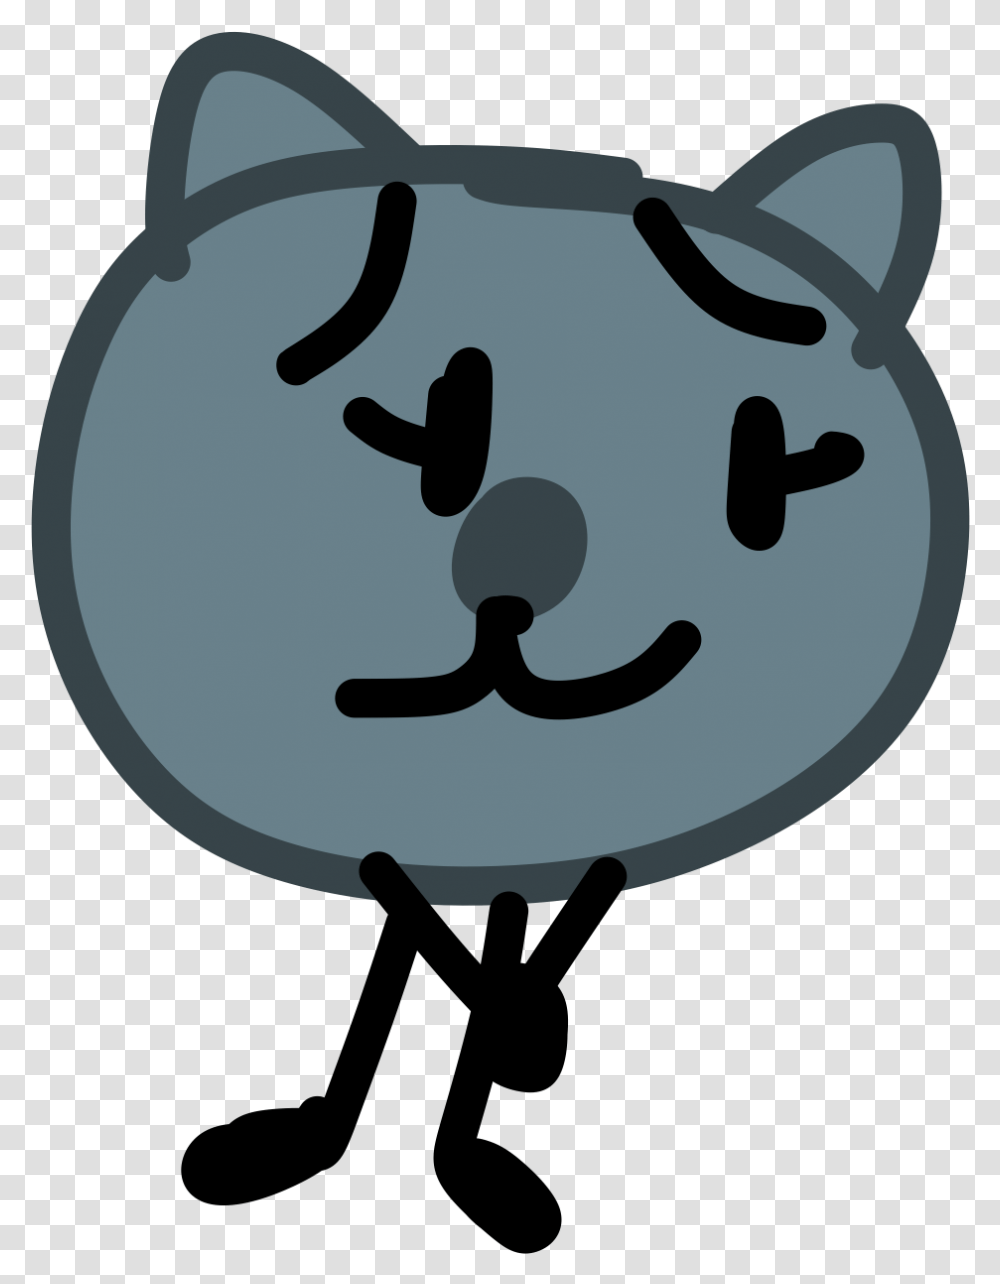 Boss Baby Back In Business Wikia, Alarm Clock, Stencil Transparent Png